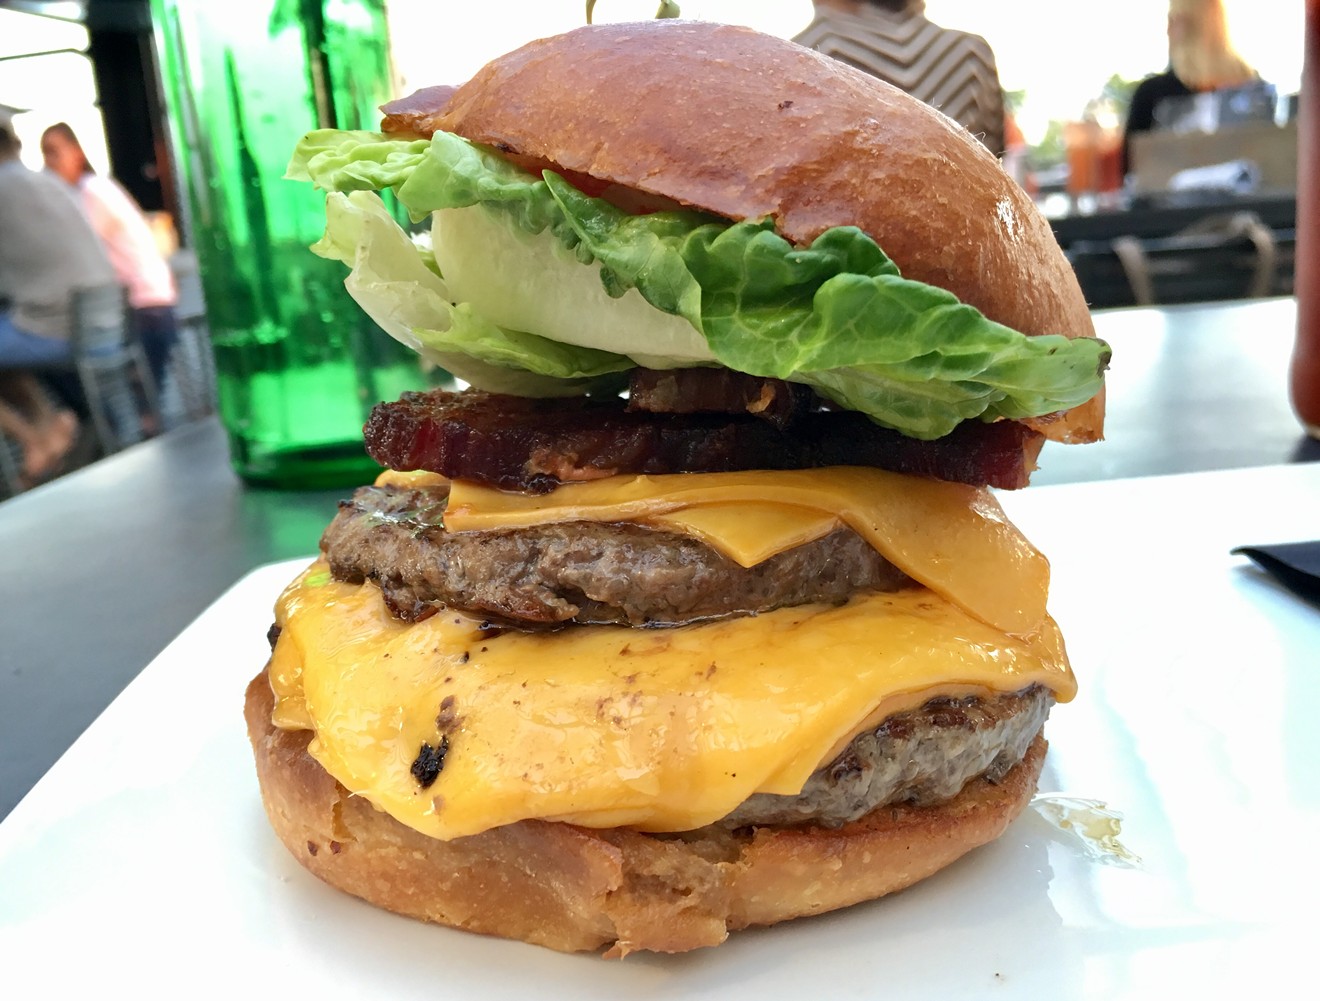 The double cheeseburger has two slices of American cheese per patty and "steak bacon" (Duroc pig) for $16. You can add a lobster tail for $8.